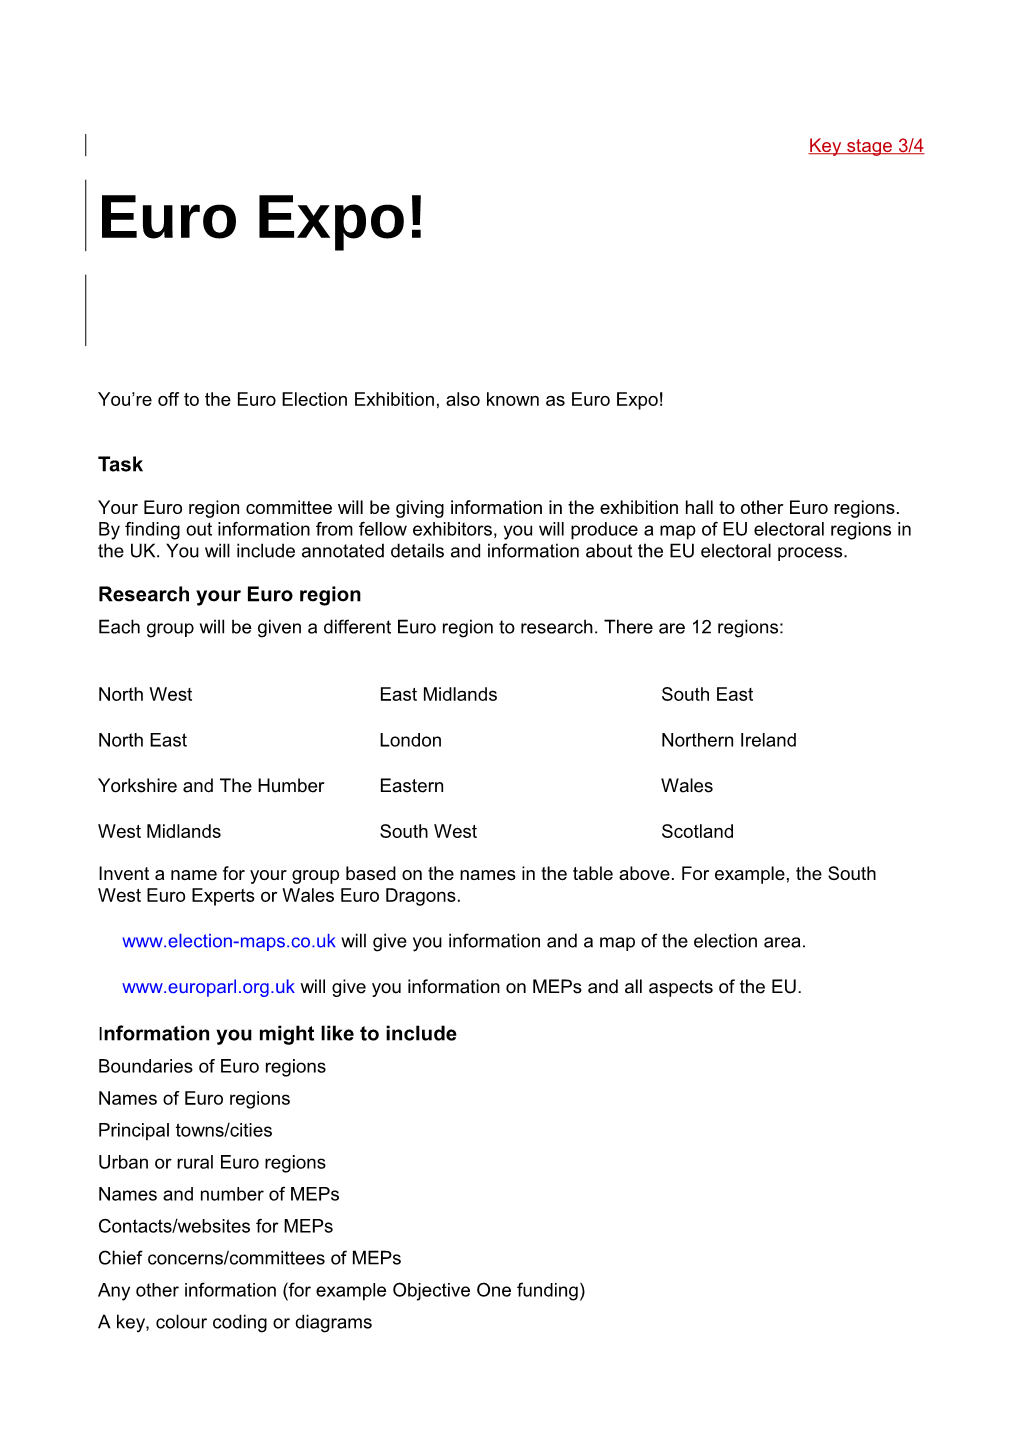 You Re Off to the Euro Election Exhibition, Also Known As Euro Expo!